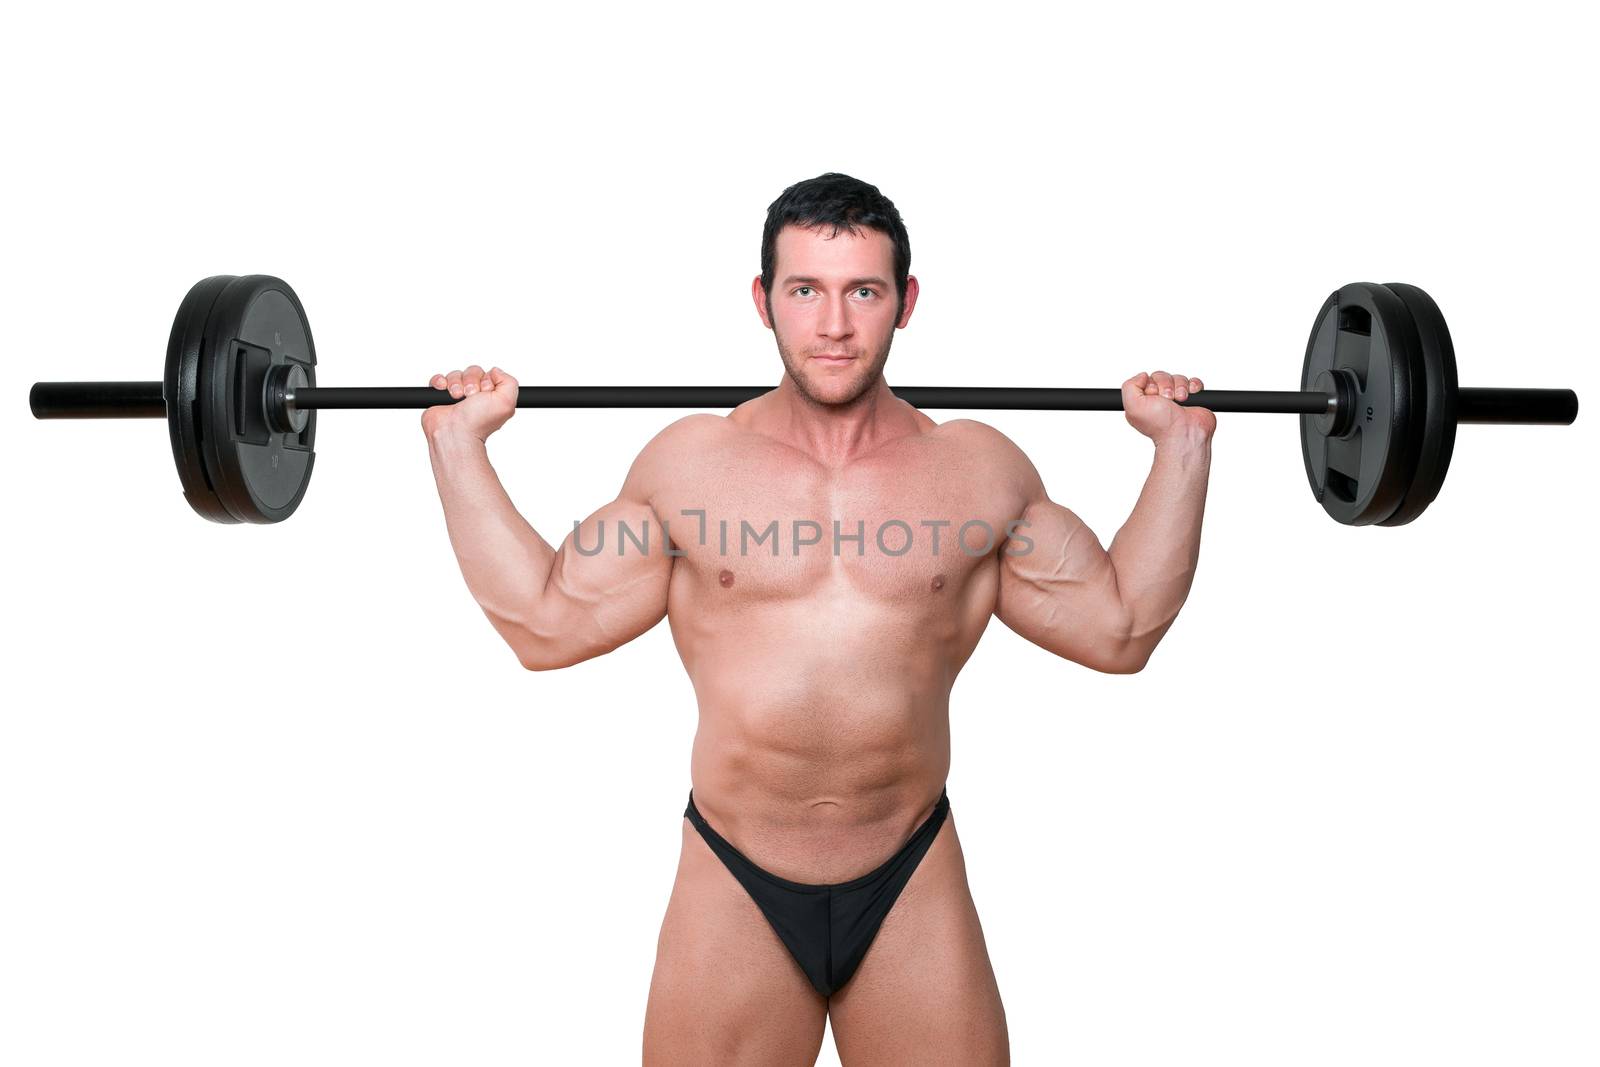 Shirtless bodybuilder lifting barbell isolated on white background. Fitness and sports.